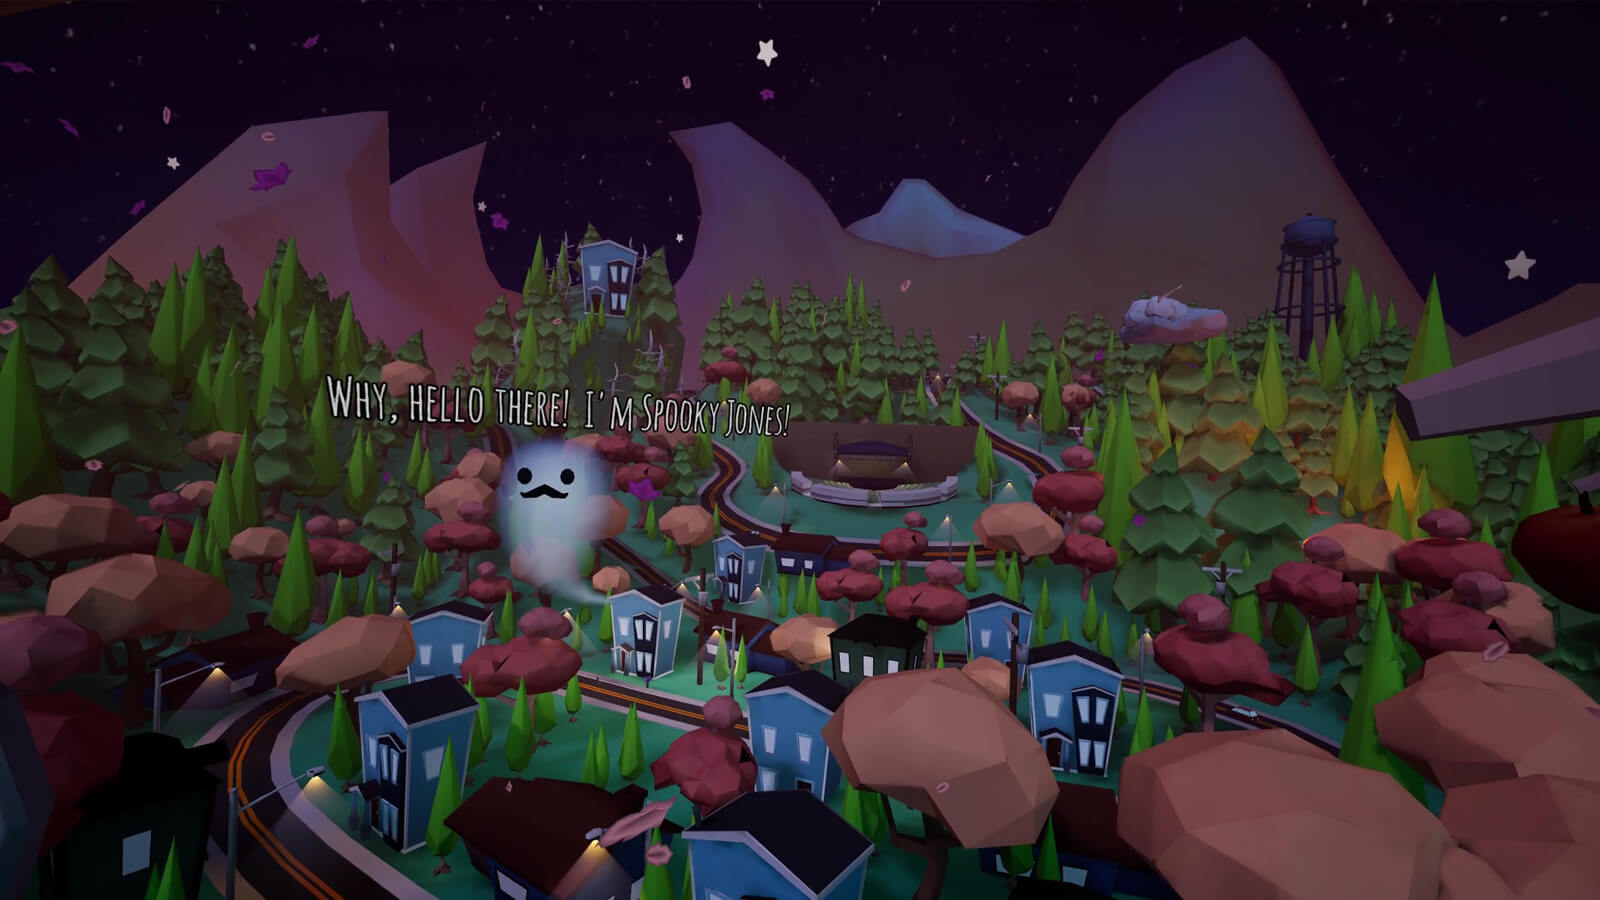 Spooky Jones the ghost greets the player hovering high above Redleaf Hollow. 